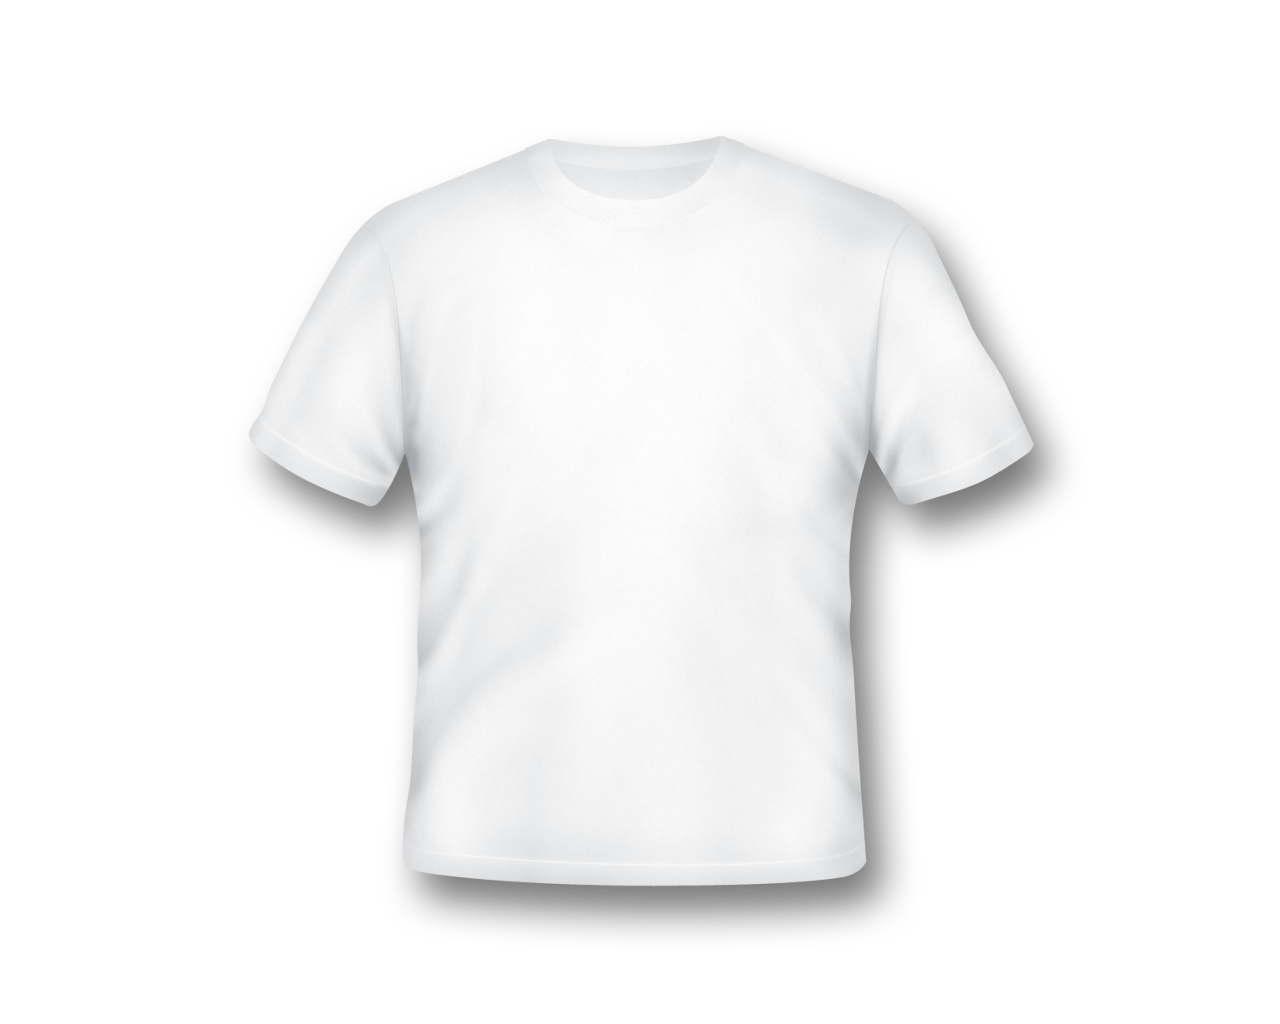 Download PNG image - Blank White T-Shirt Template PNG 